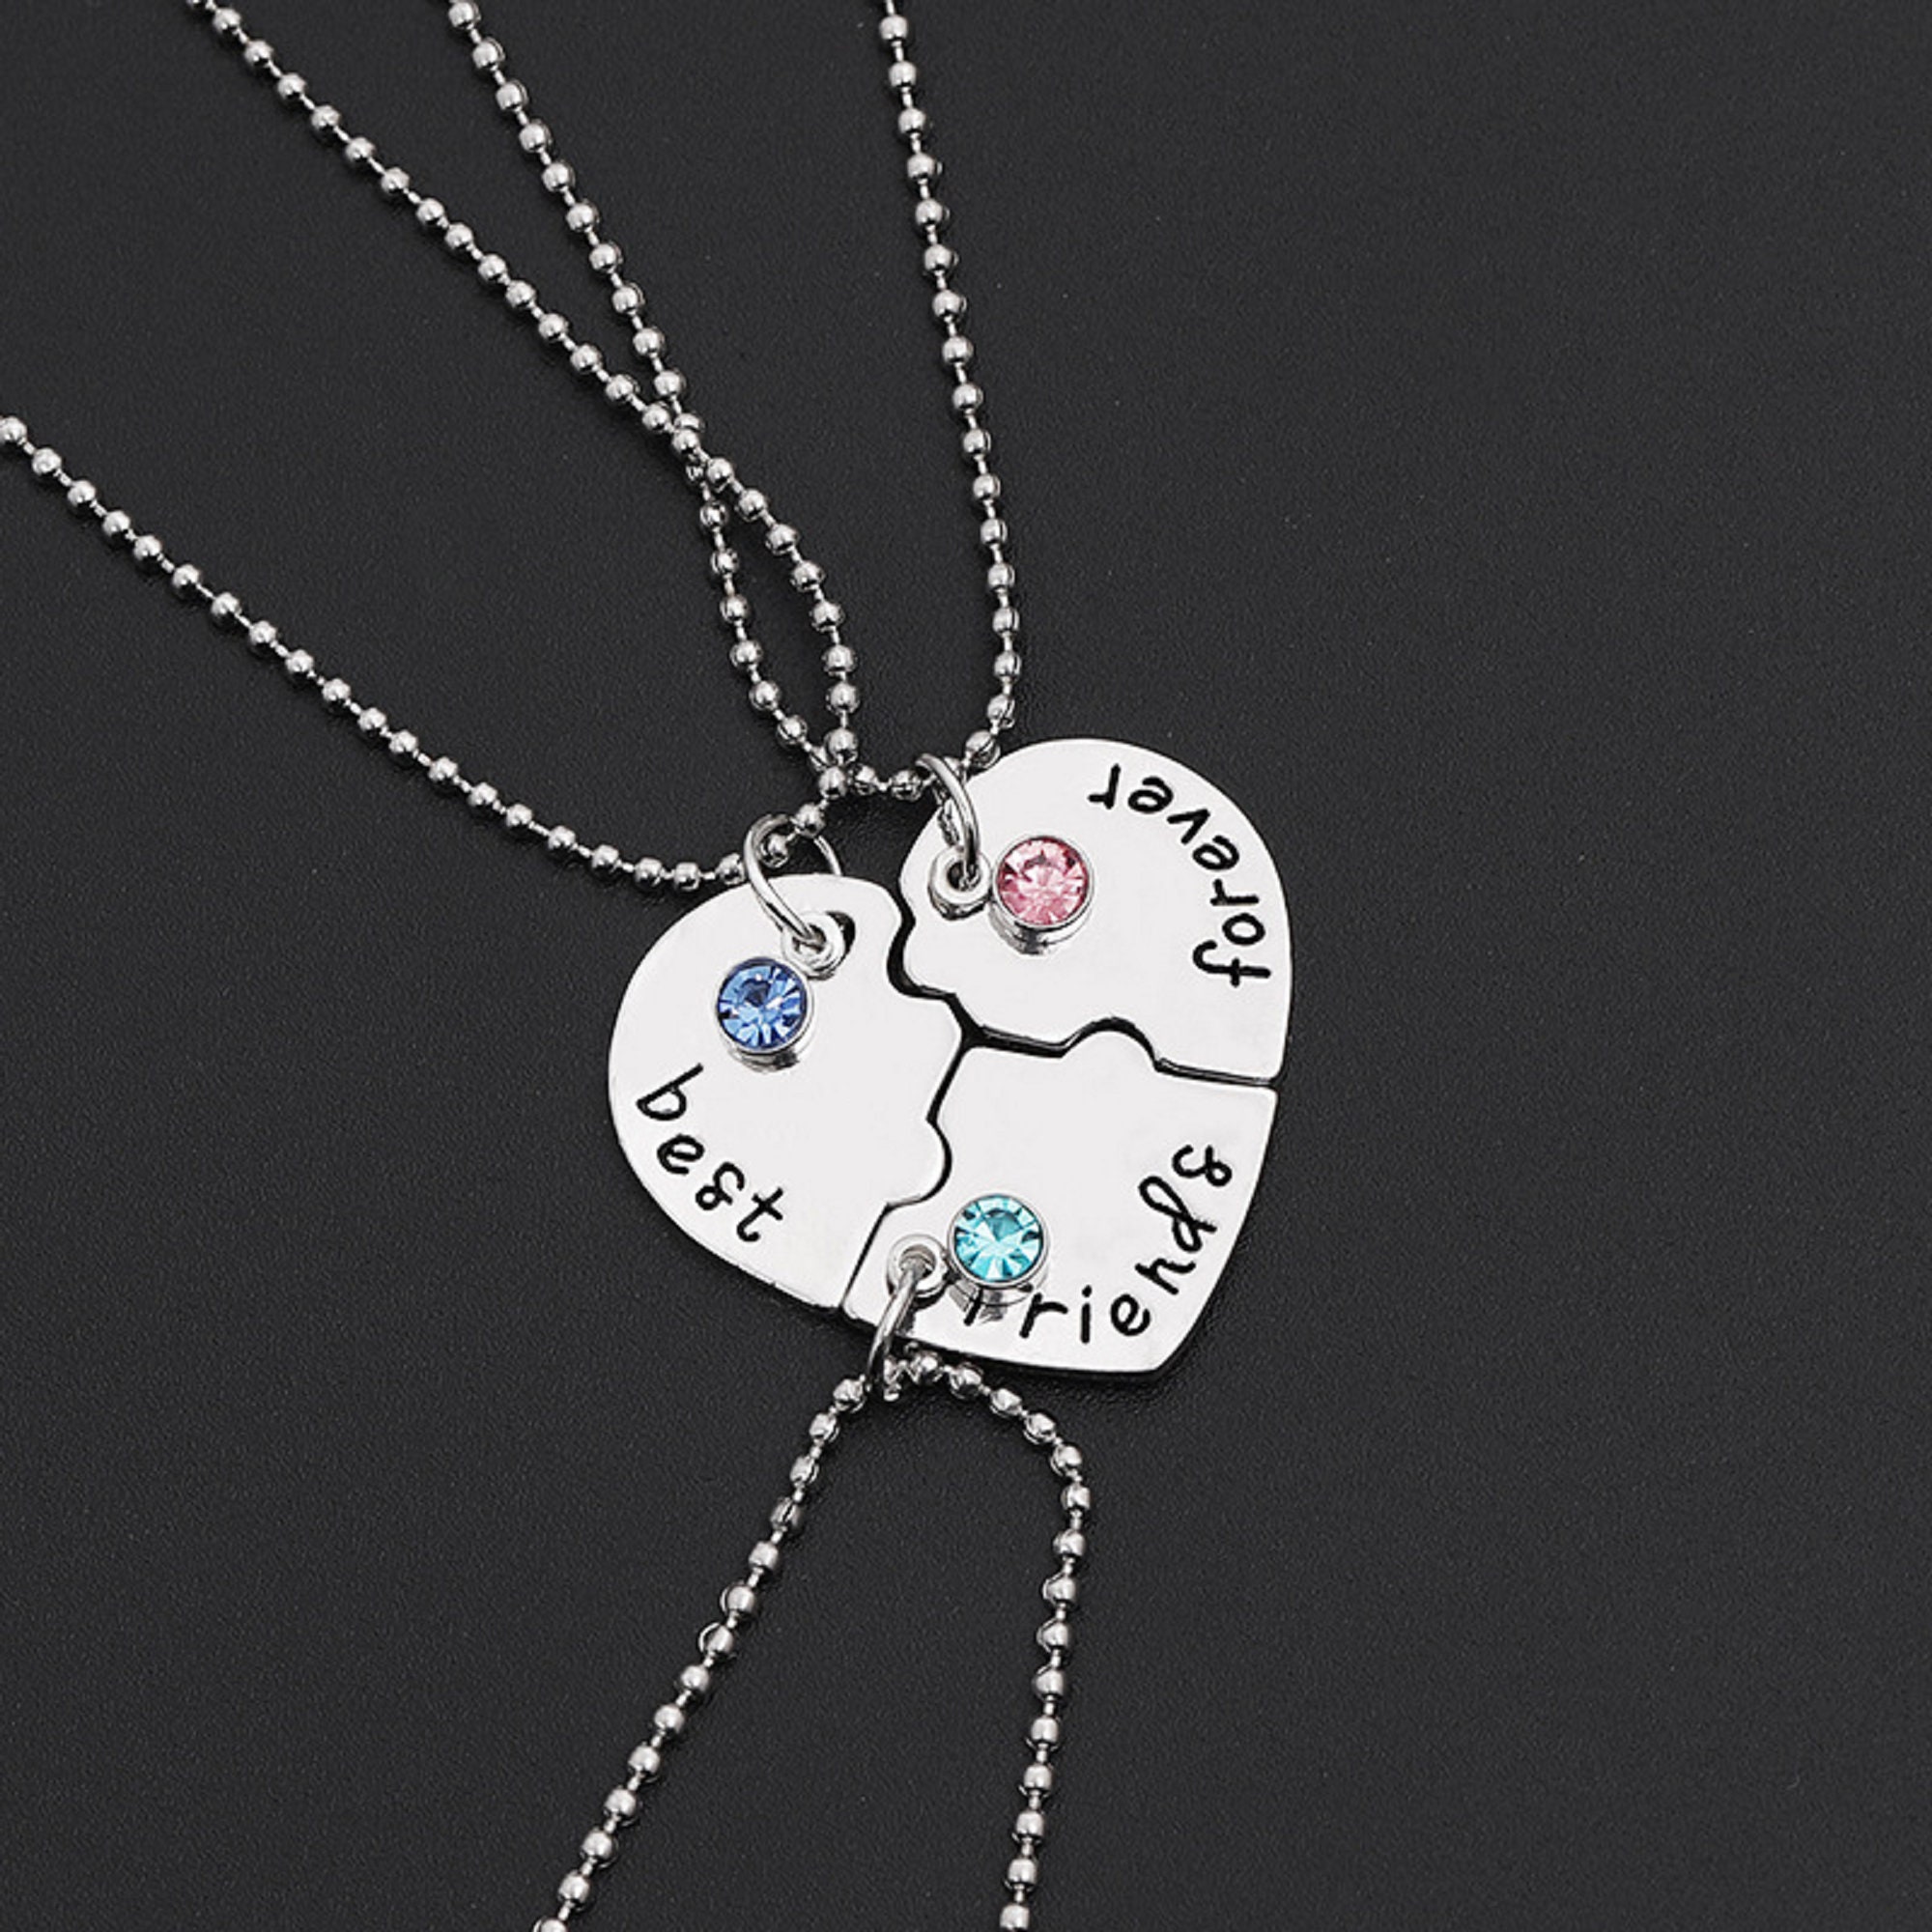 Aggregate more than 73 3 bff necklaces best - POPPY